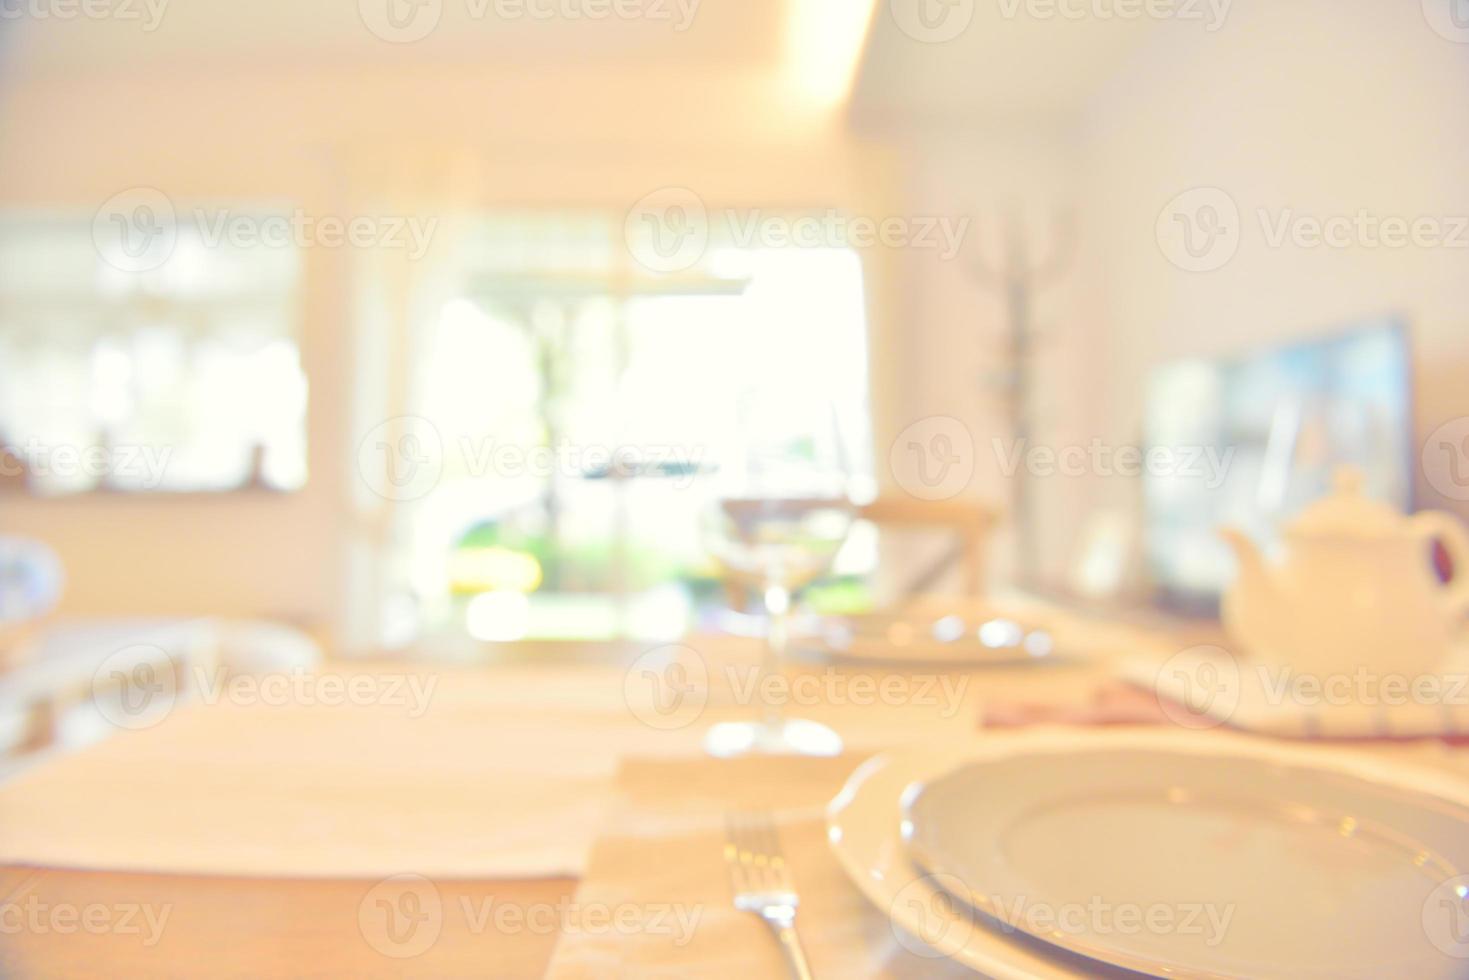 Abstract blur Kitchen Room area interior for background photo